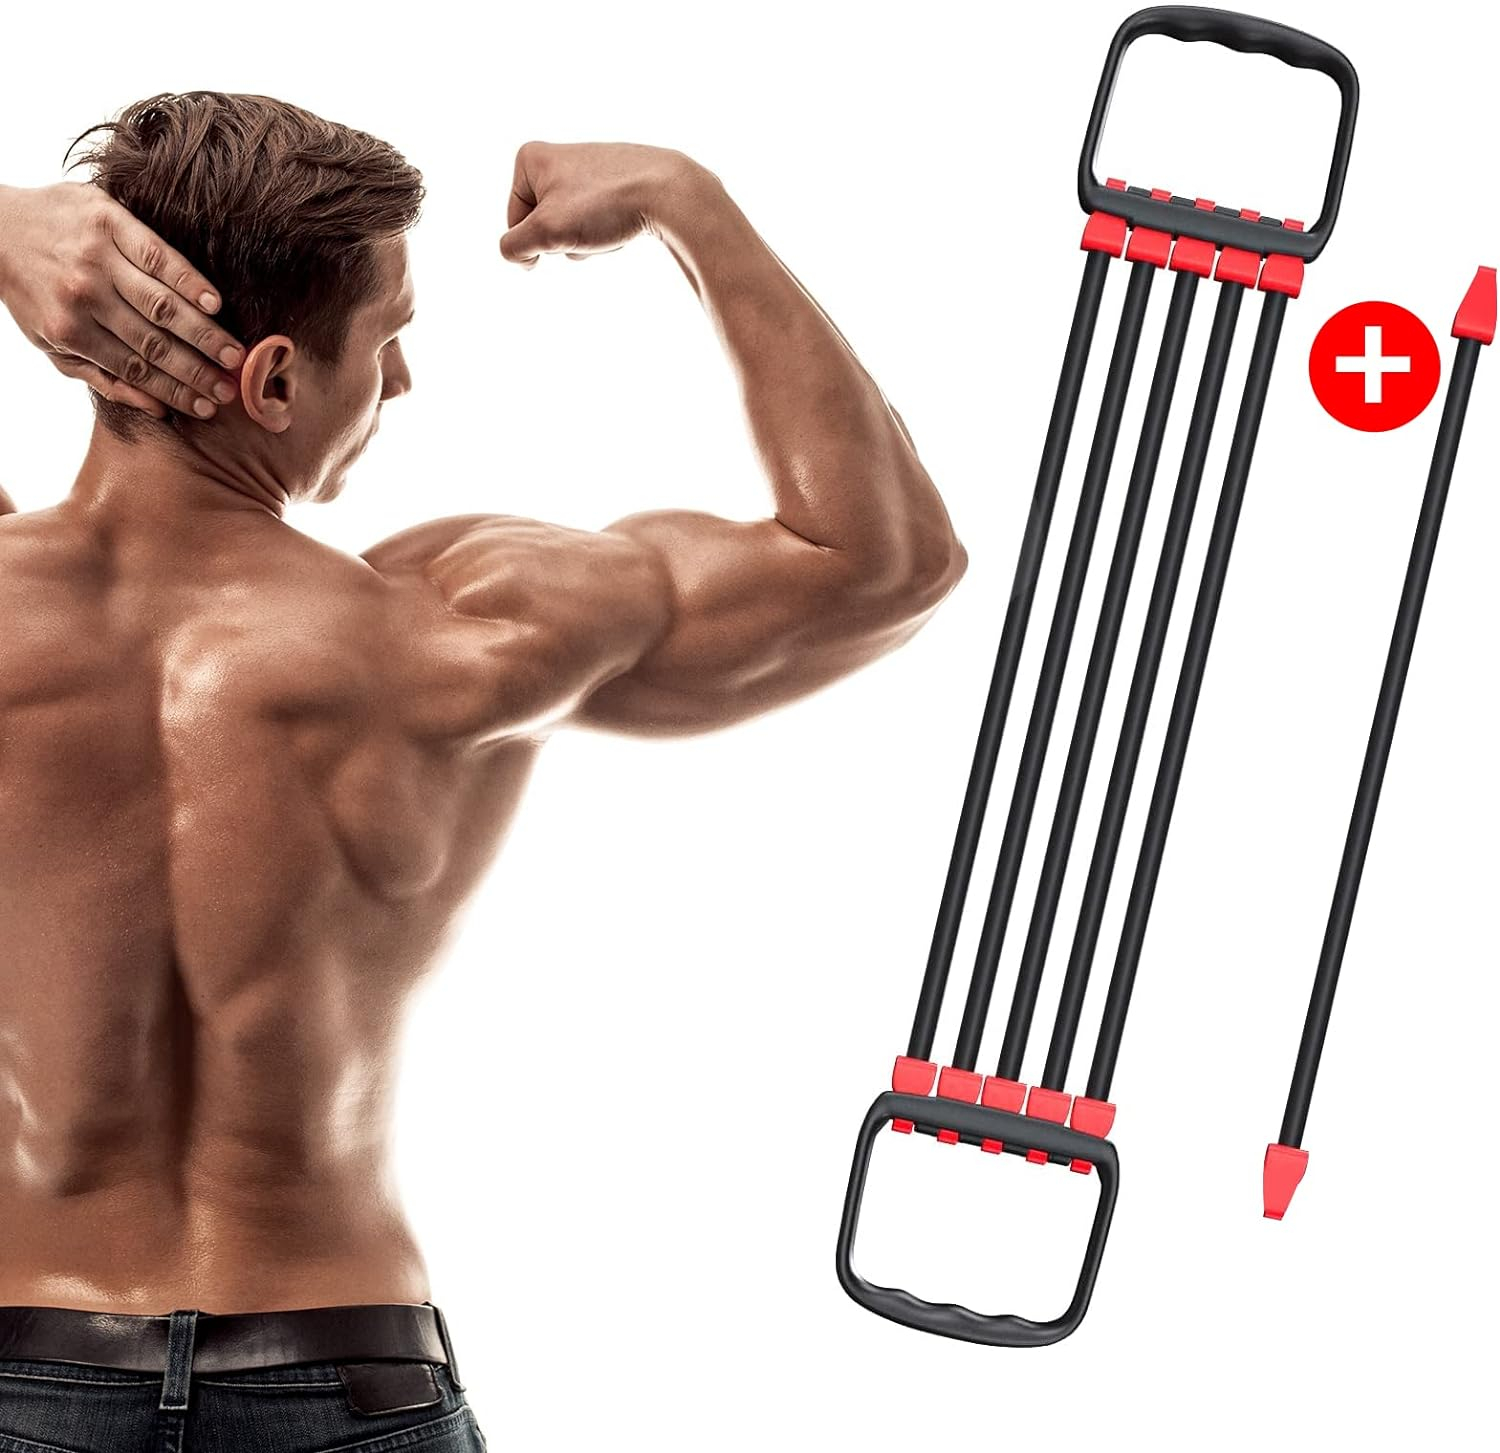 Chest Expander for Chest Arm Legs Shoulder Back Muscles Training, Chest Exerciser for Men with 5 Removable Ropes, Fitness Training Set for Pilates Push Ups Full Body Home Gym Workout Band